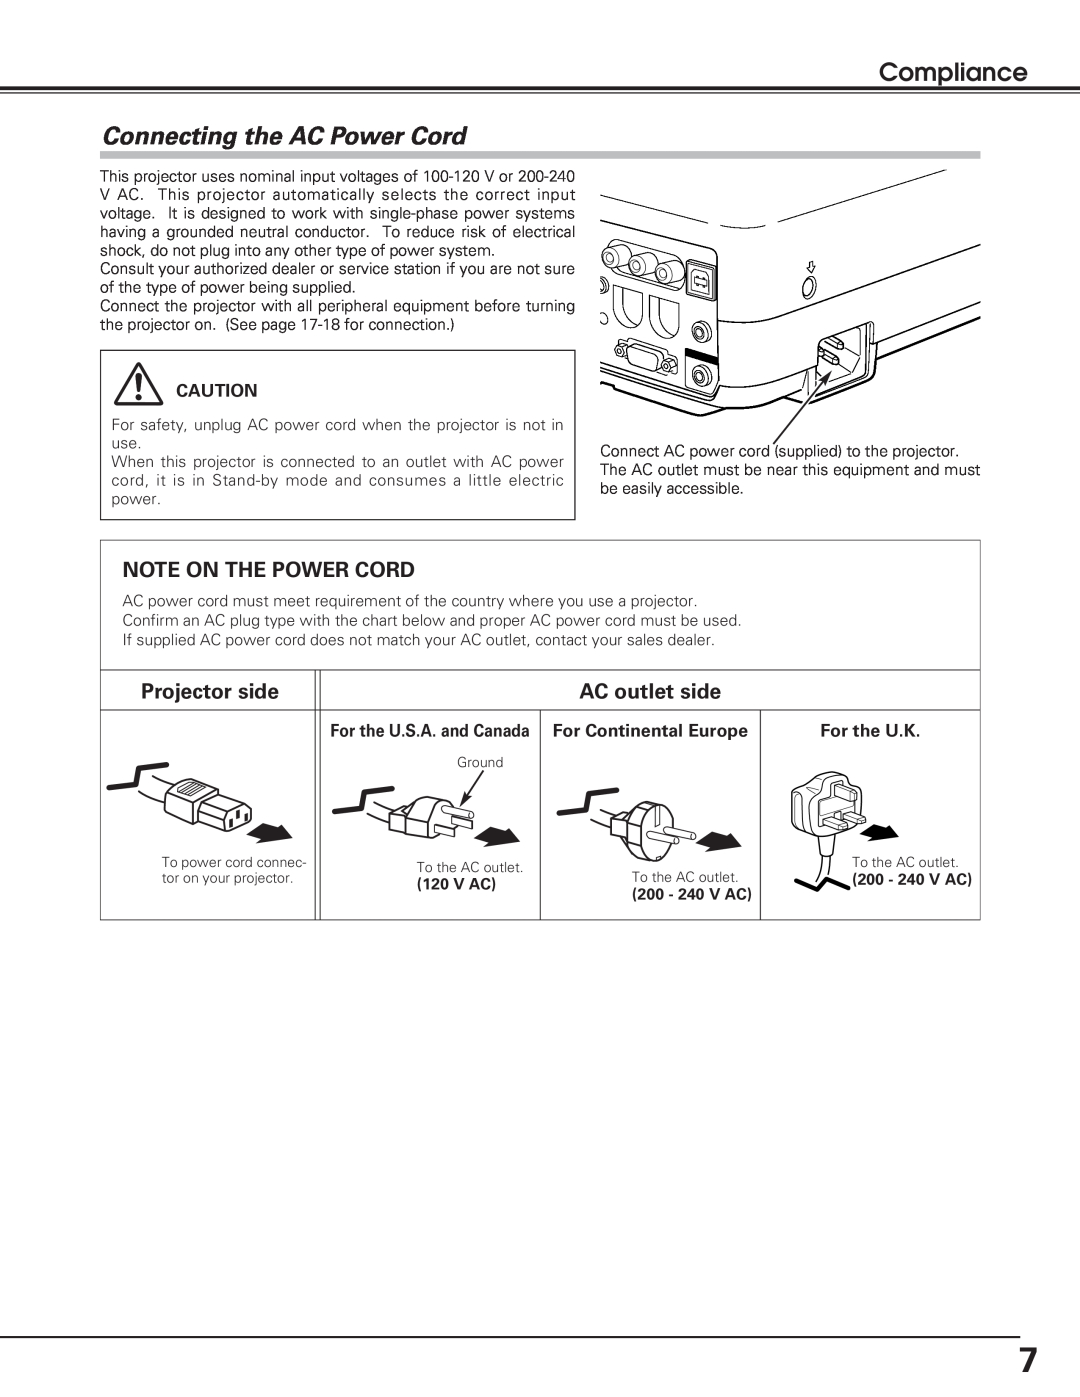 Sanyo PLC-SL20 owner manual Compliance, Connecting the AC Power Cord, For the U.S.A. and Canada, V Ac, 200 - 240 V AC 